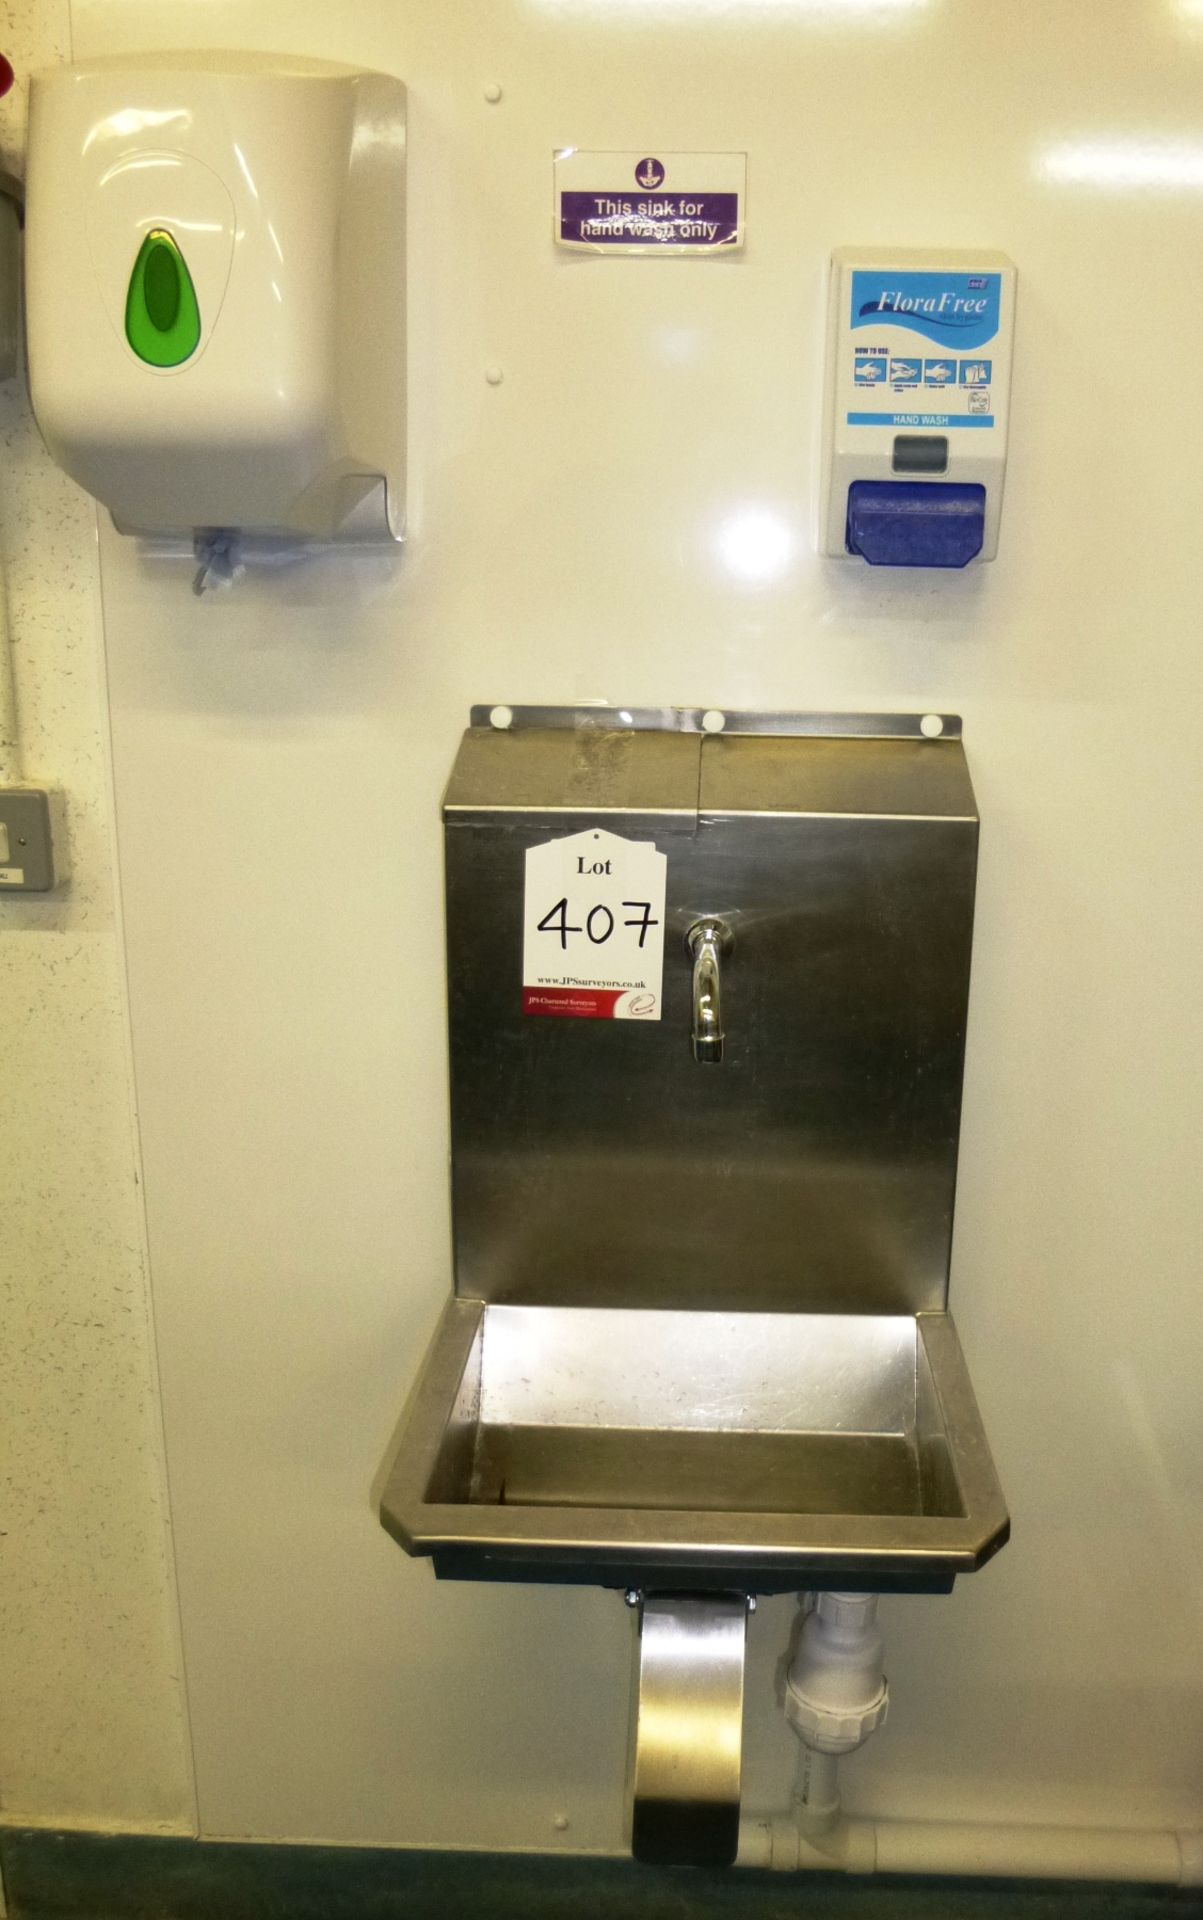 Wall Mounted Hygenox Knee Operated Stainless Steel Sink Unit w/ Soap & Paper Towel Dispenser